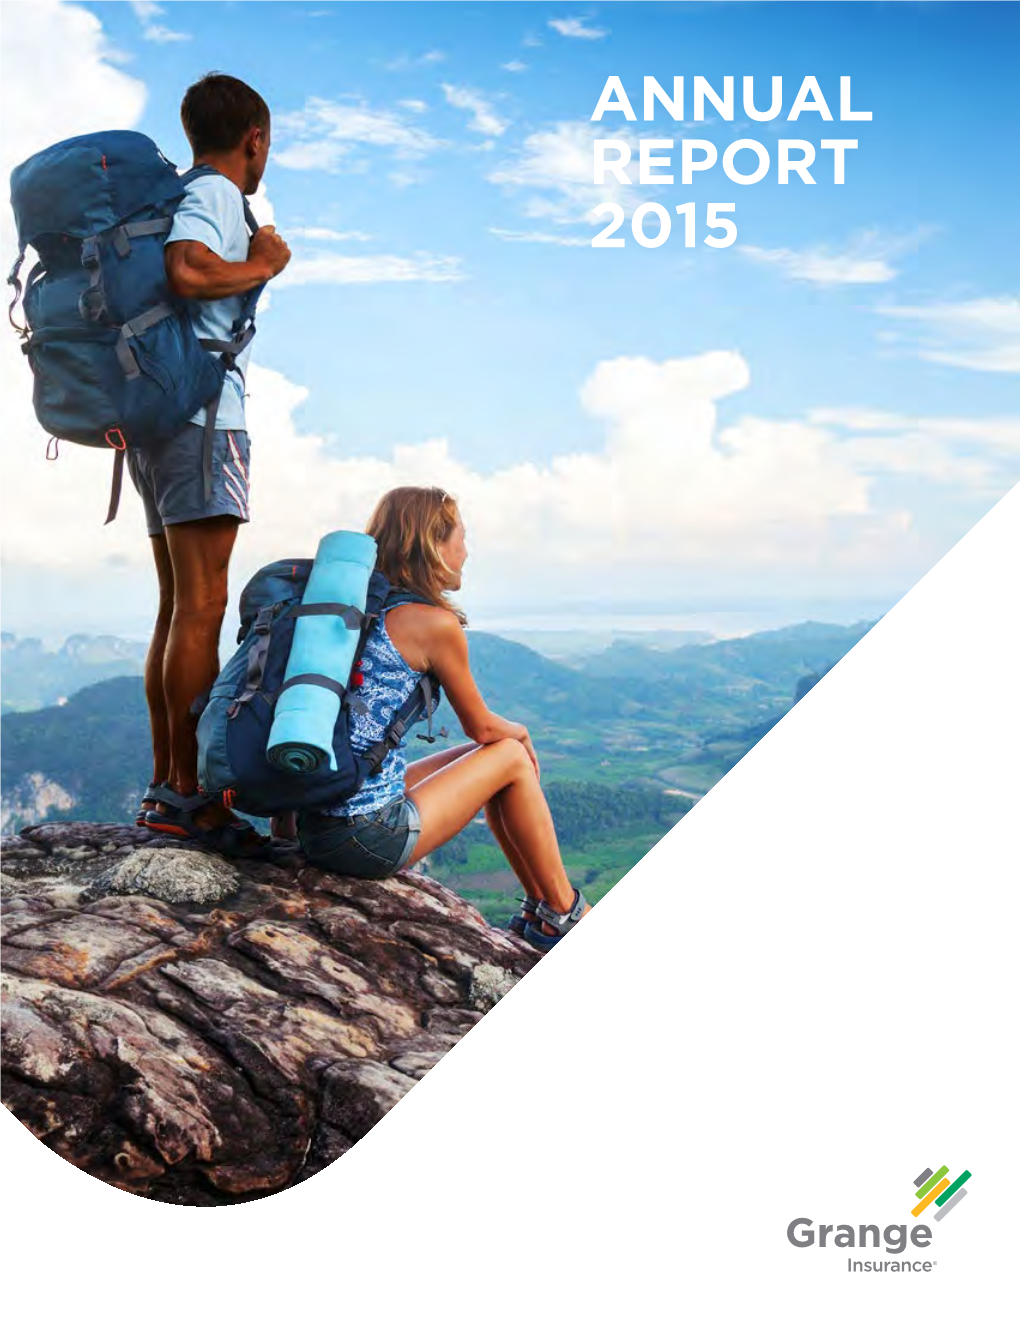 Annual Report 2015 Our Mission Is to Provide Peace of Mind and Protection During Life's Unexpected Events